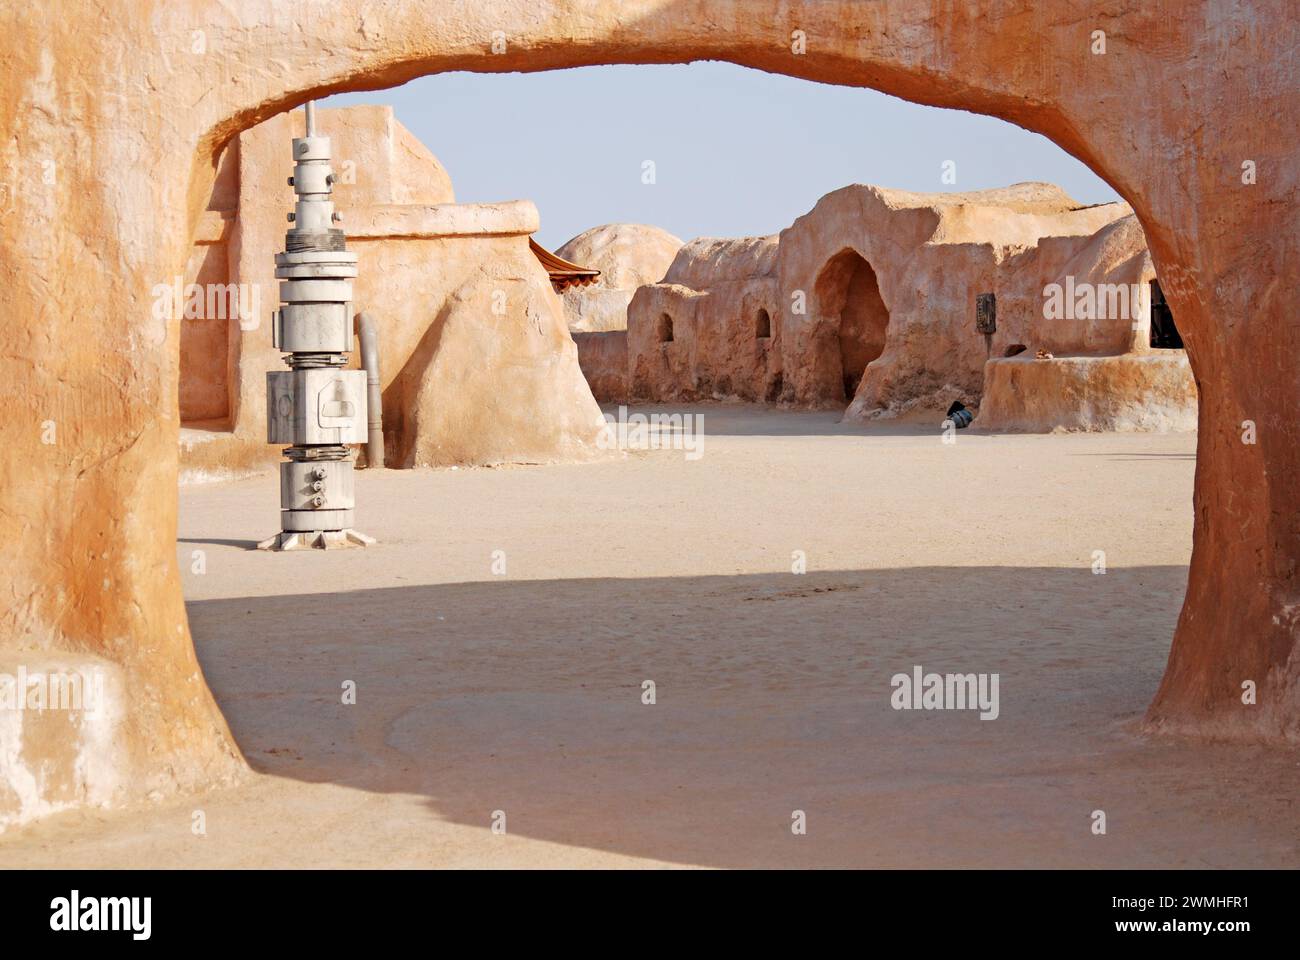 The remains of the Mos Espa Star Wars film set in the Sahara Desert near Tamerza or Tamaghza, Chebika, Tozeur Governorate, Tunisia Stock Photo